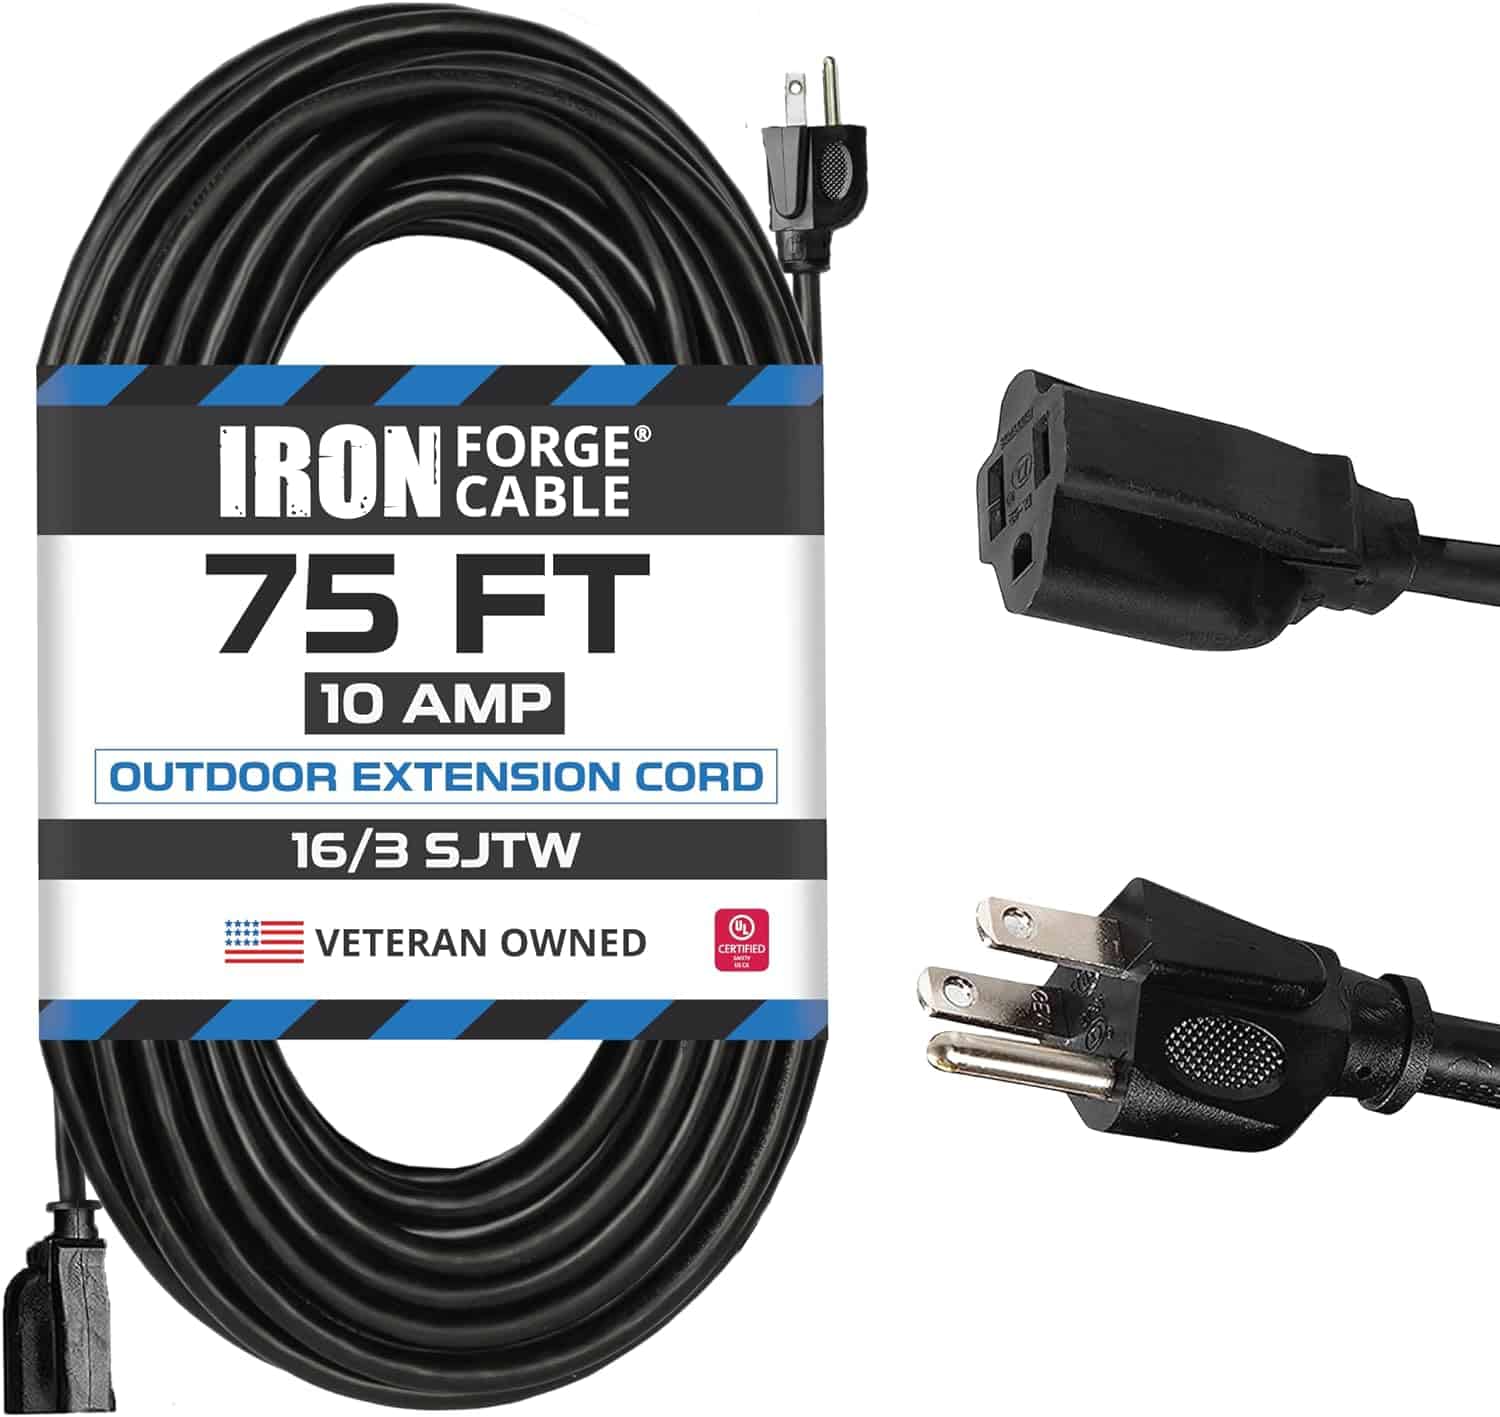 Iron-Forge-Cable-75-Ft-Outdoor-Extension-Cord-16-3-Black-75-Foot-Extension-Cord-Indoor-Outdoor-Use-3-Prong-Weatherproof-Exterior-Extension-Cord